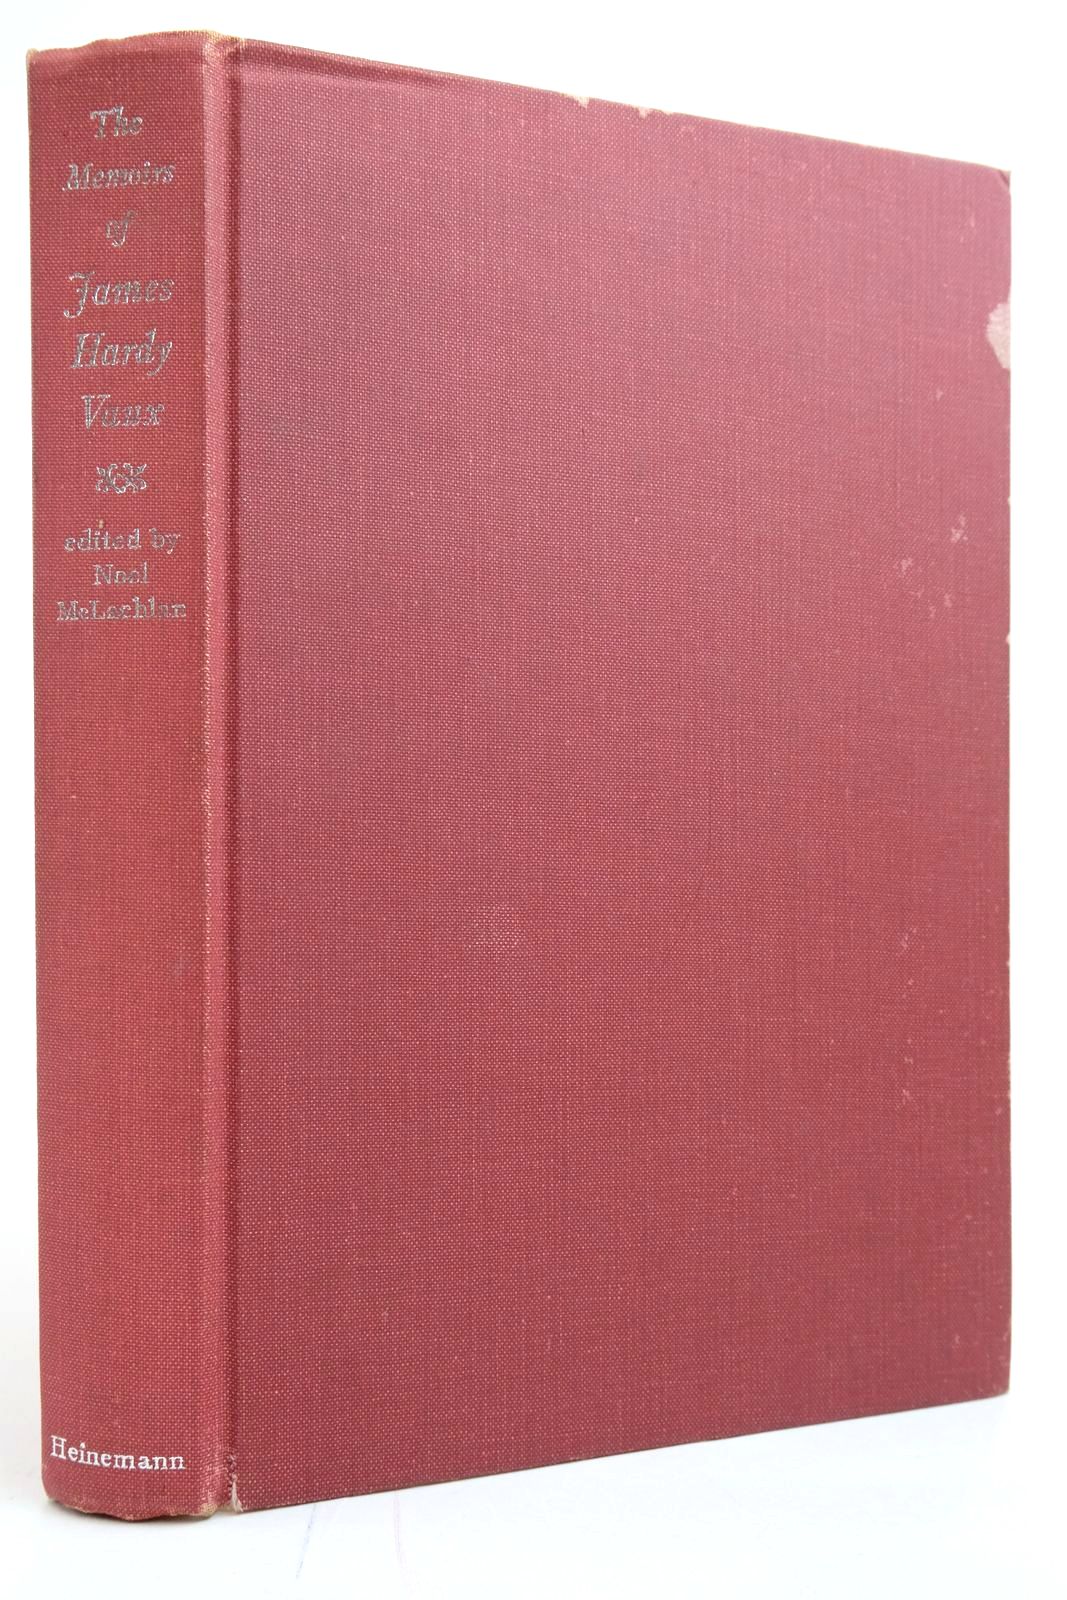 Photo of MEMOIRS OF JAMES HARDY VAUX- Stock Number: 2135186